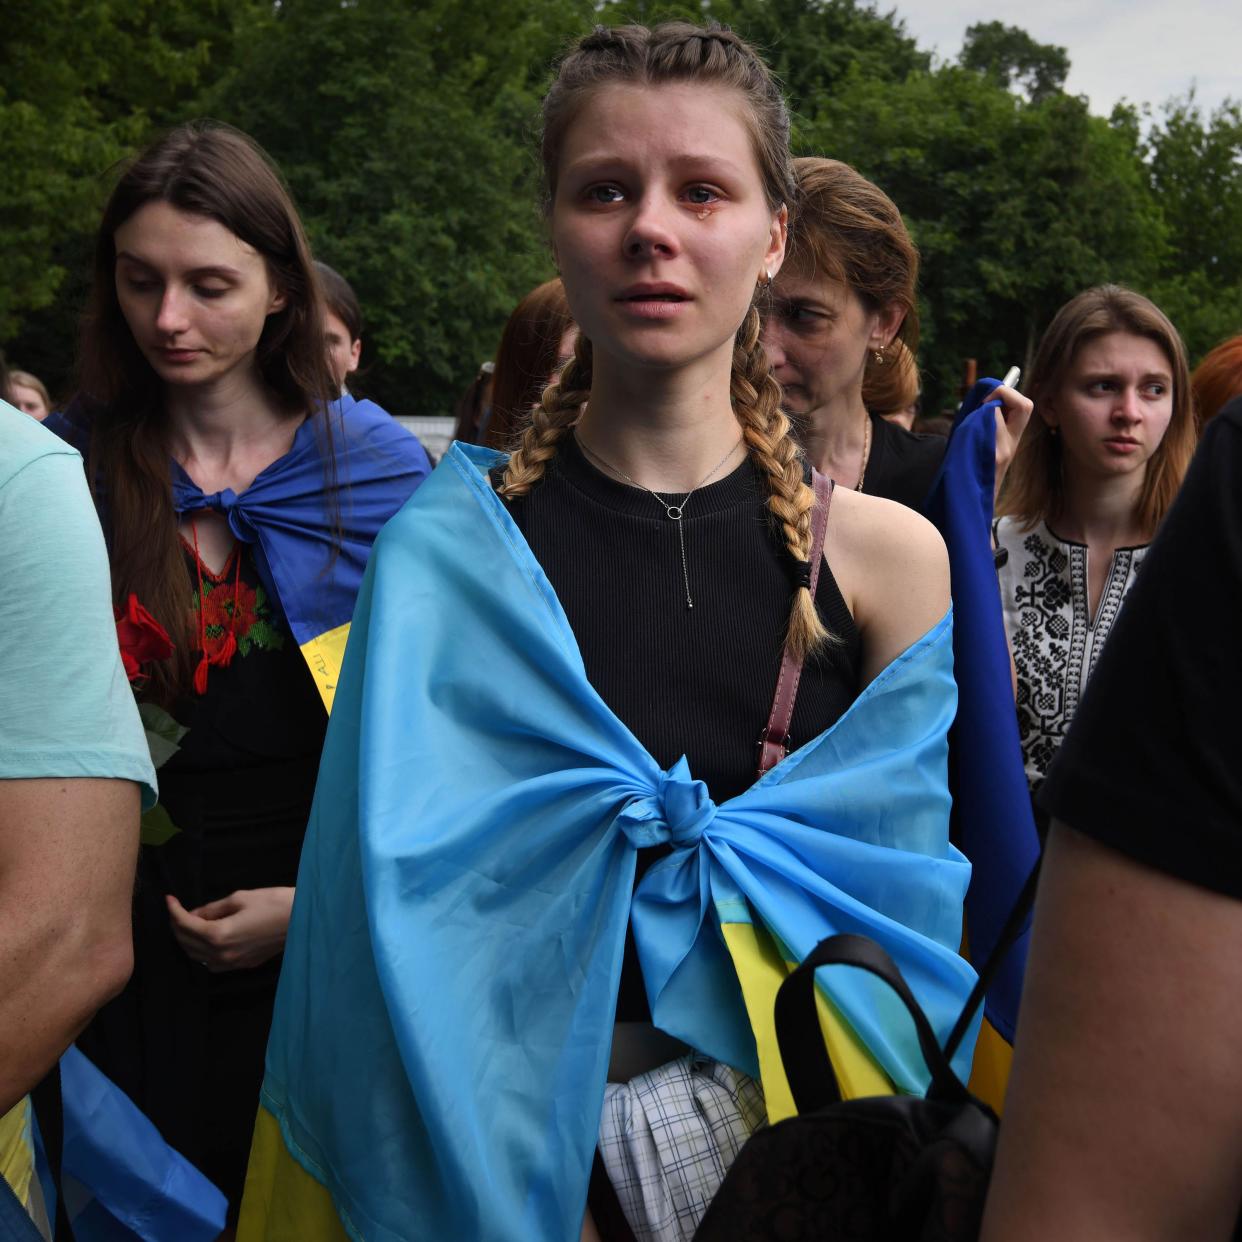 Loved ones attend a funeral ceremony for activist and soldier R. Ratushnyi , 24, who was killed while fighting in the Kharkiv region during the Russian invasion, at Baikove Cemetery in Kyiv, Ukraine, on June 18, 2022. Ratushnyi has become a symbol of revolution and mourners came wrapped in the Ukrainian flag, leaving flowers and sorrow at his gravesite.